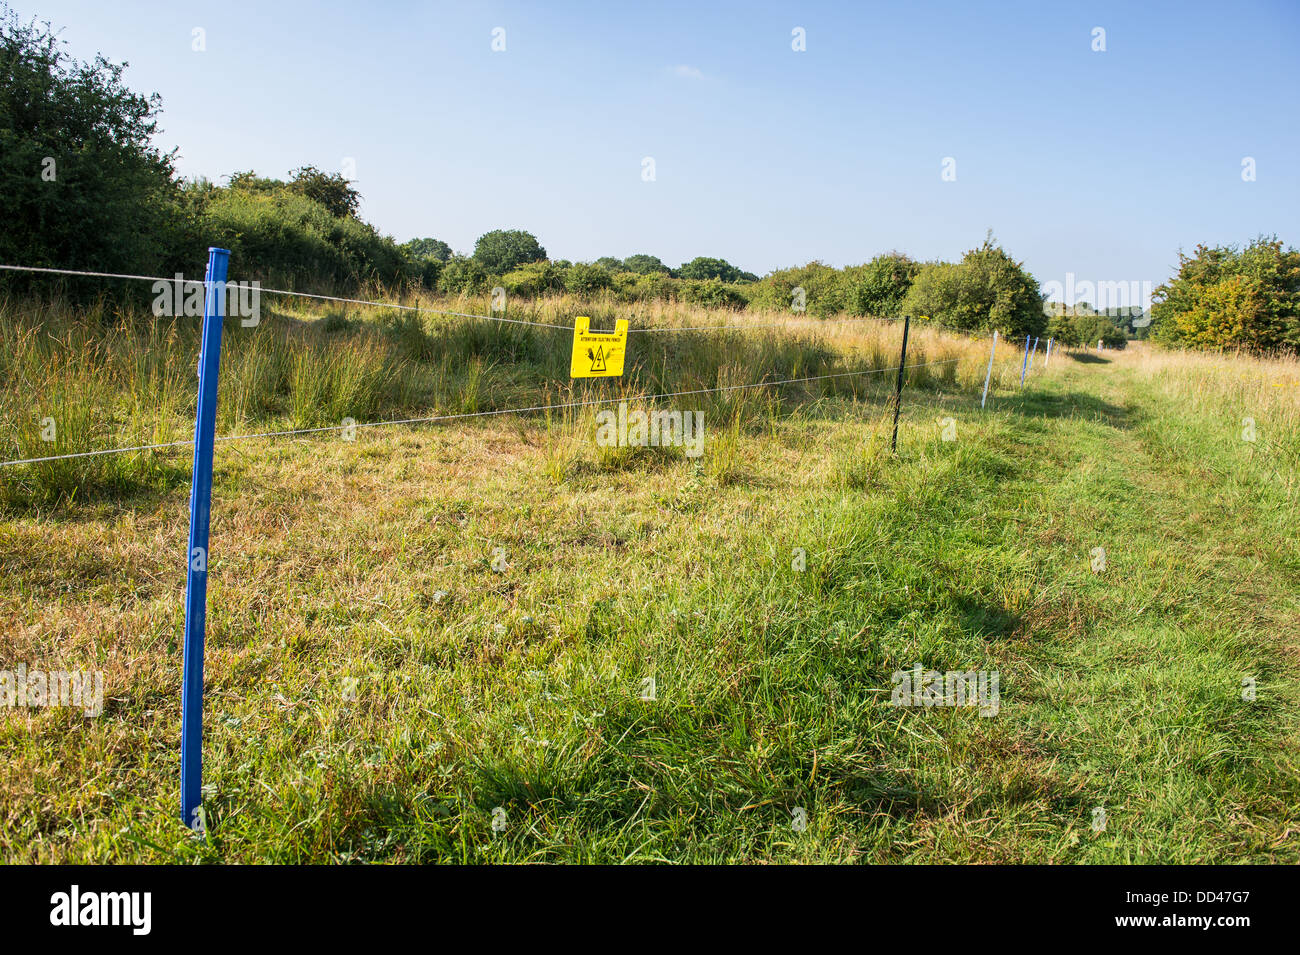 Electric fence in a field Stock Photo